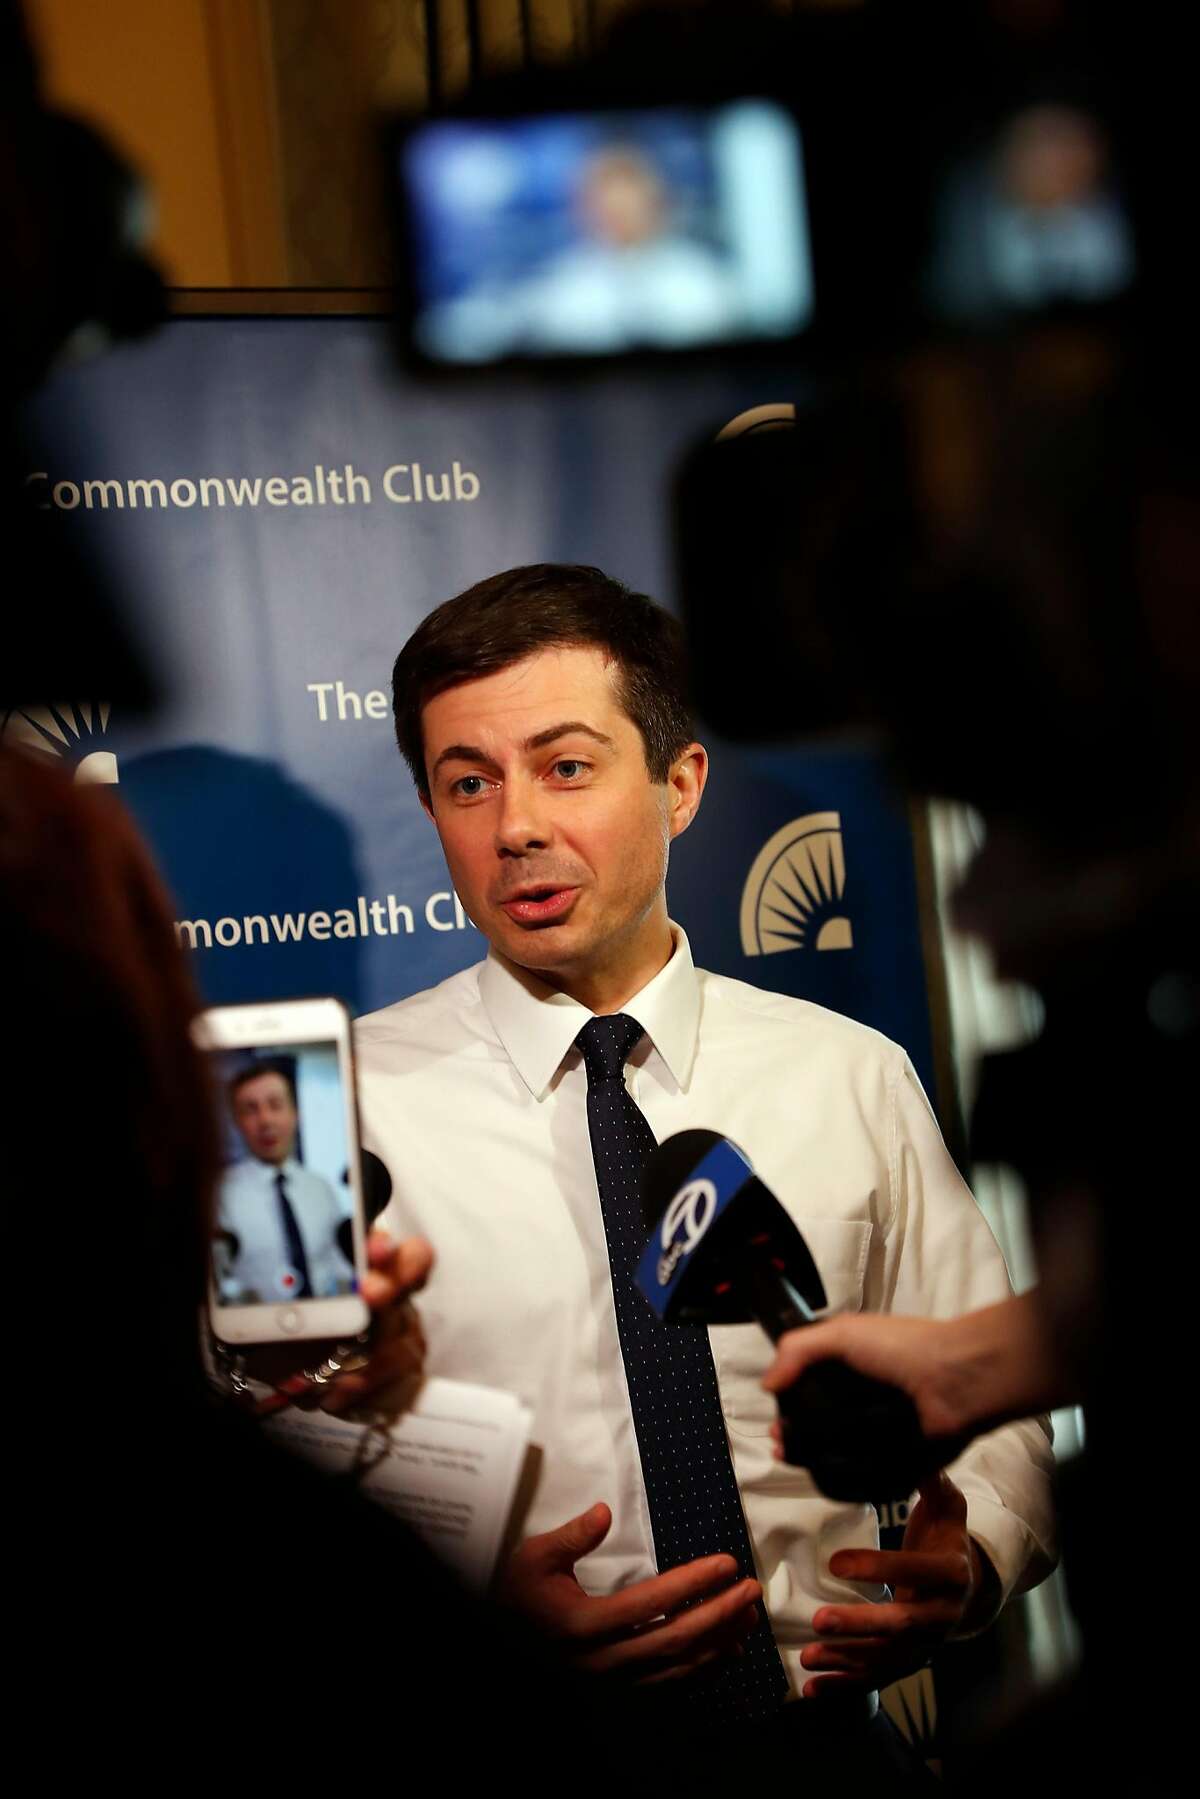 Democratic presidential candidate Mayor Pete Buttigieg before Commonwealth Club of California appearance in San Francisco, Calif., on Thursday, March 28, 2019.